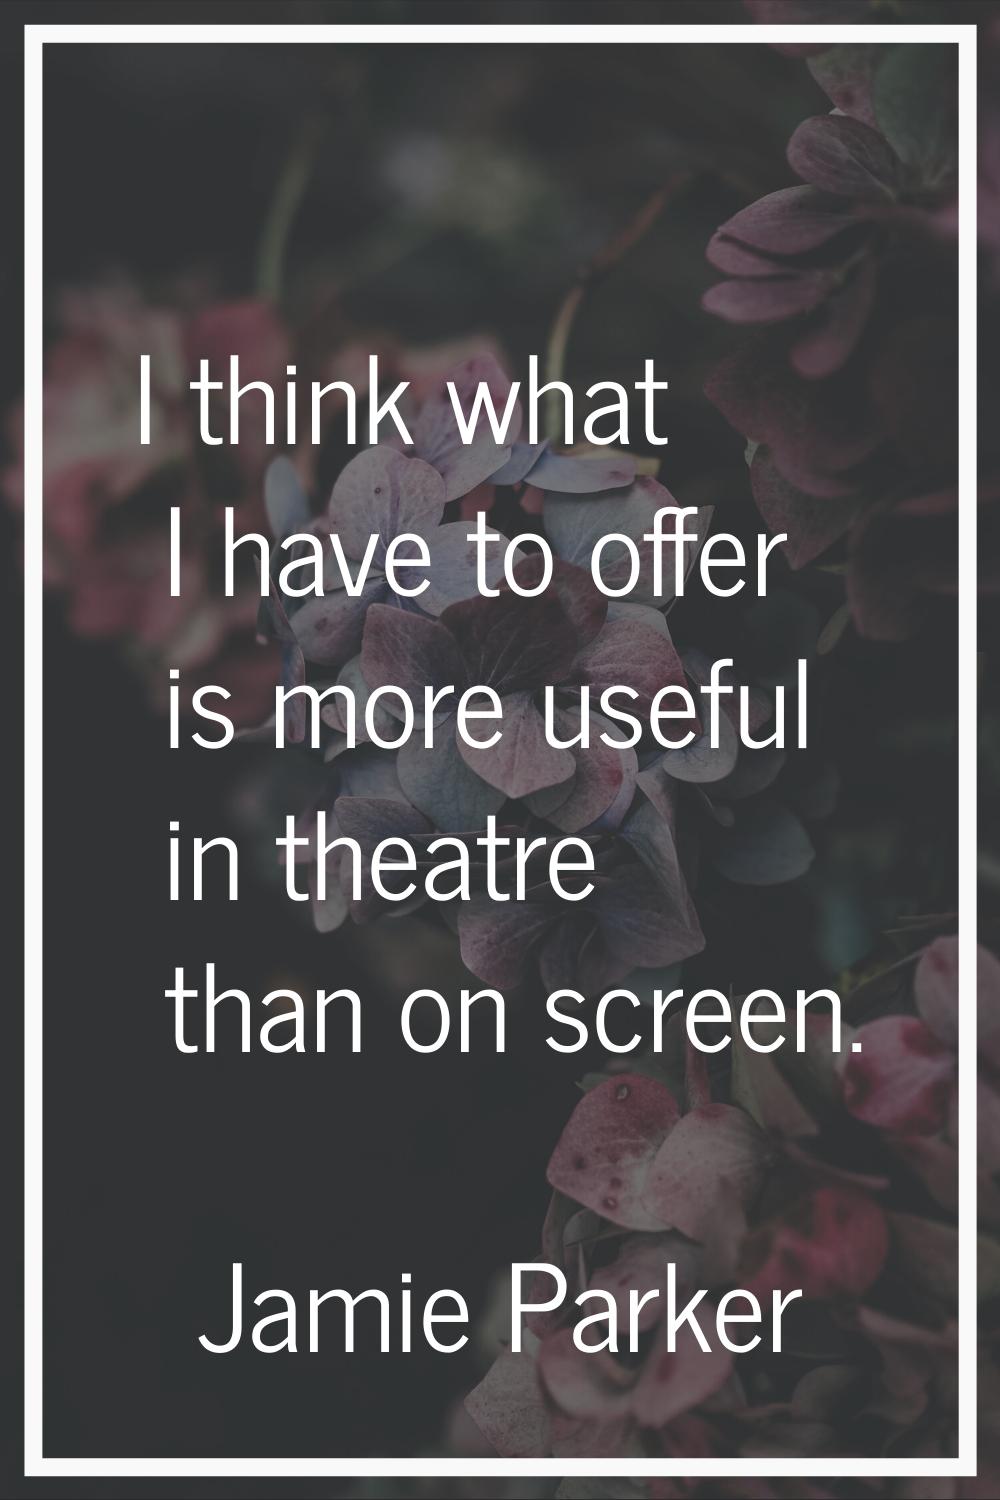 I think what I have to offer is more useful in theatre than on screen.